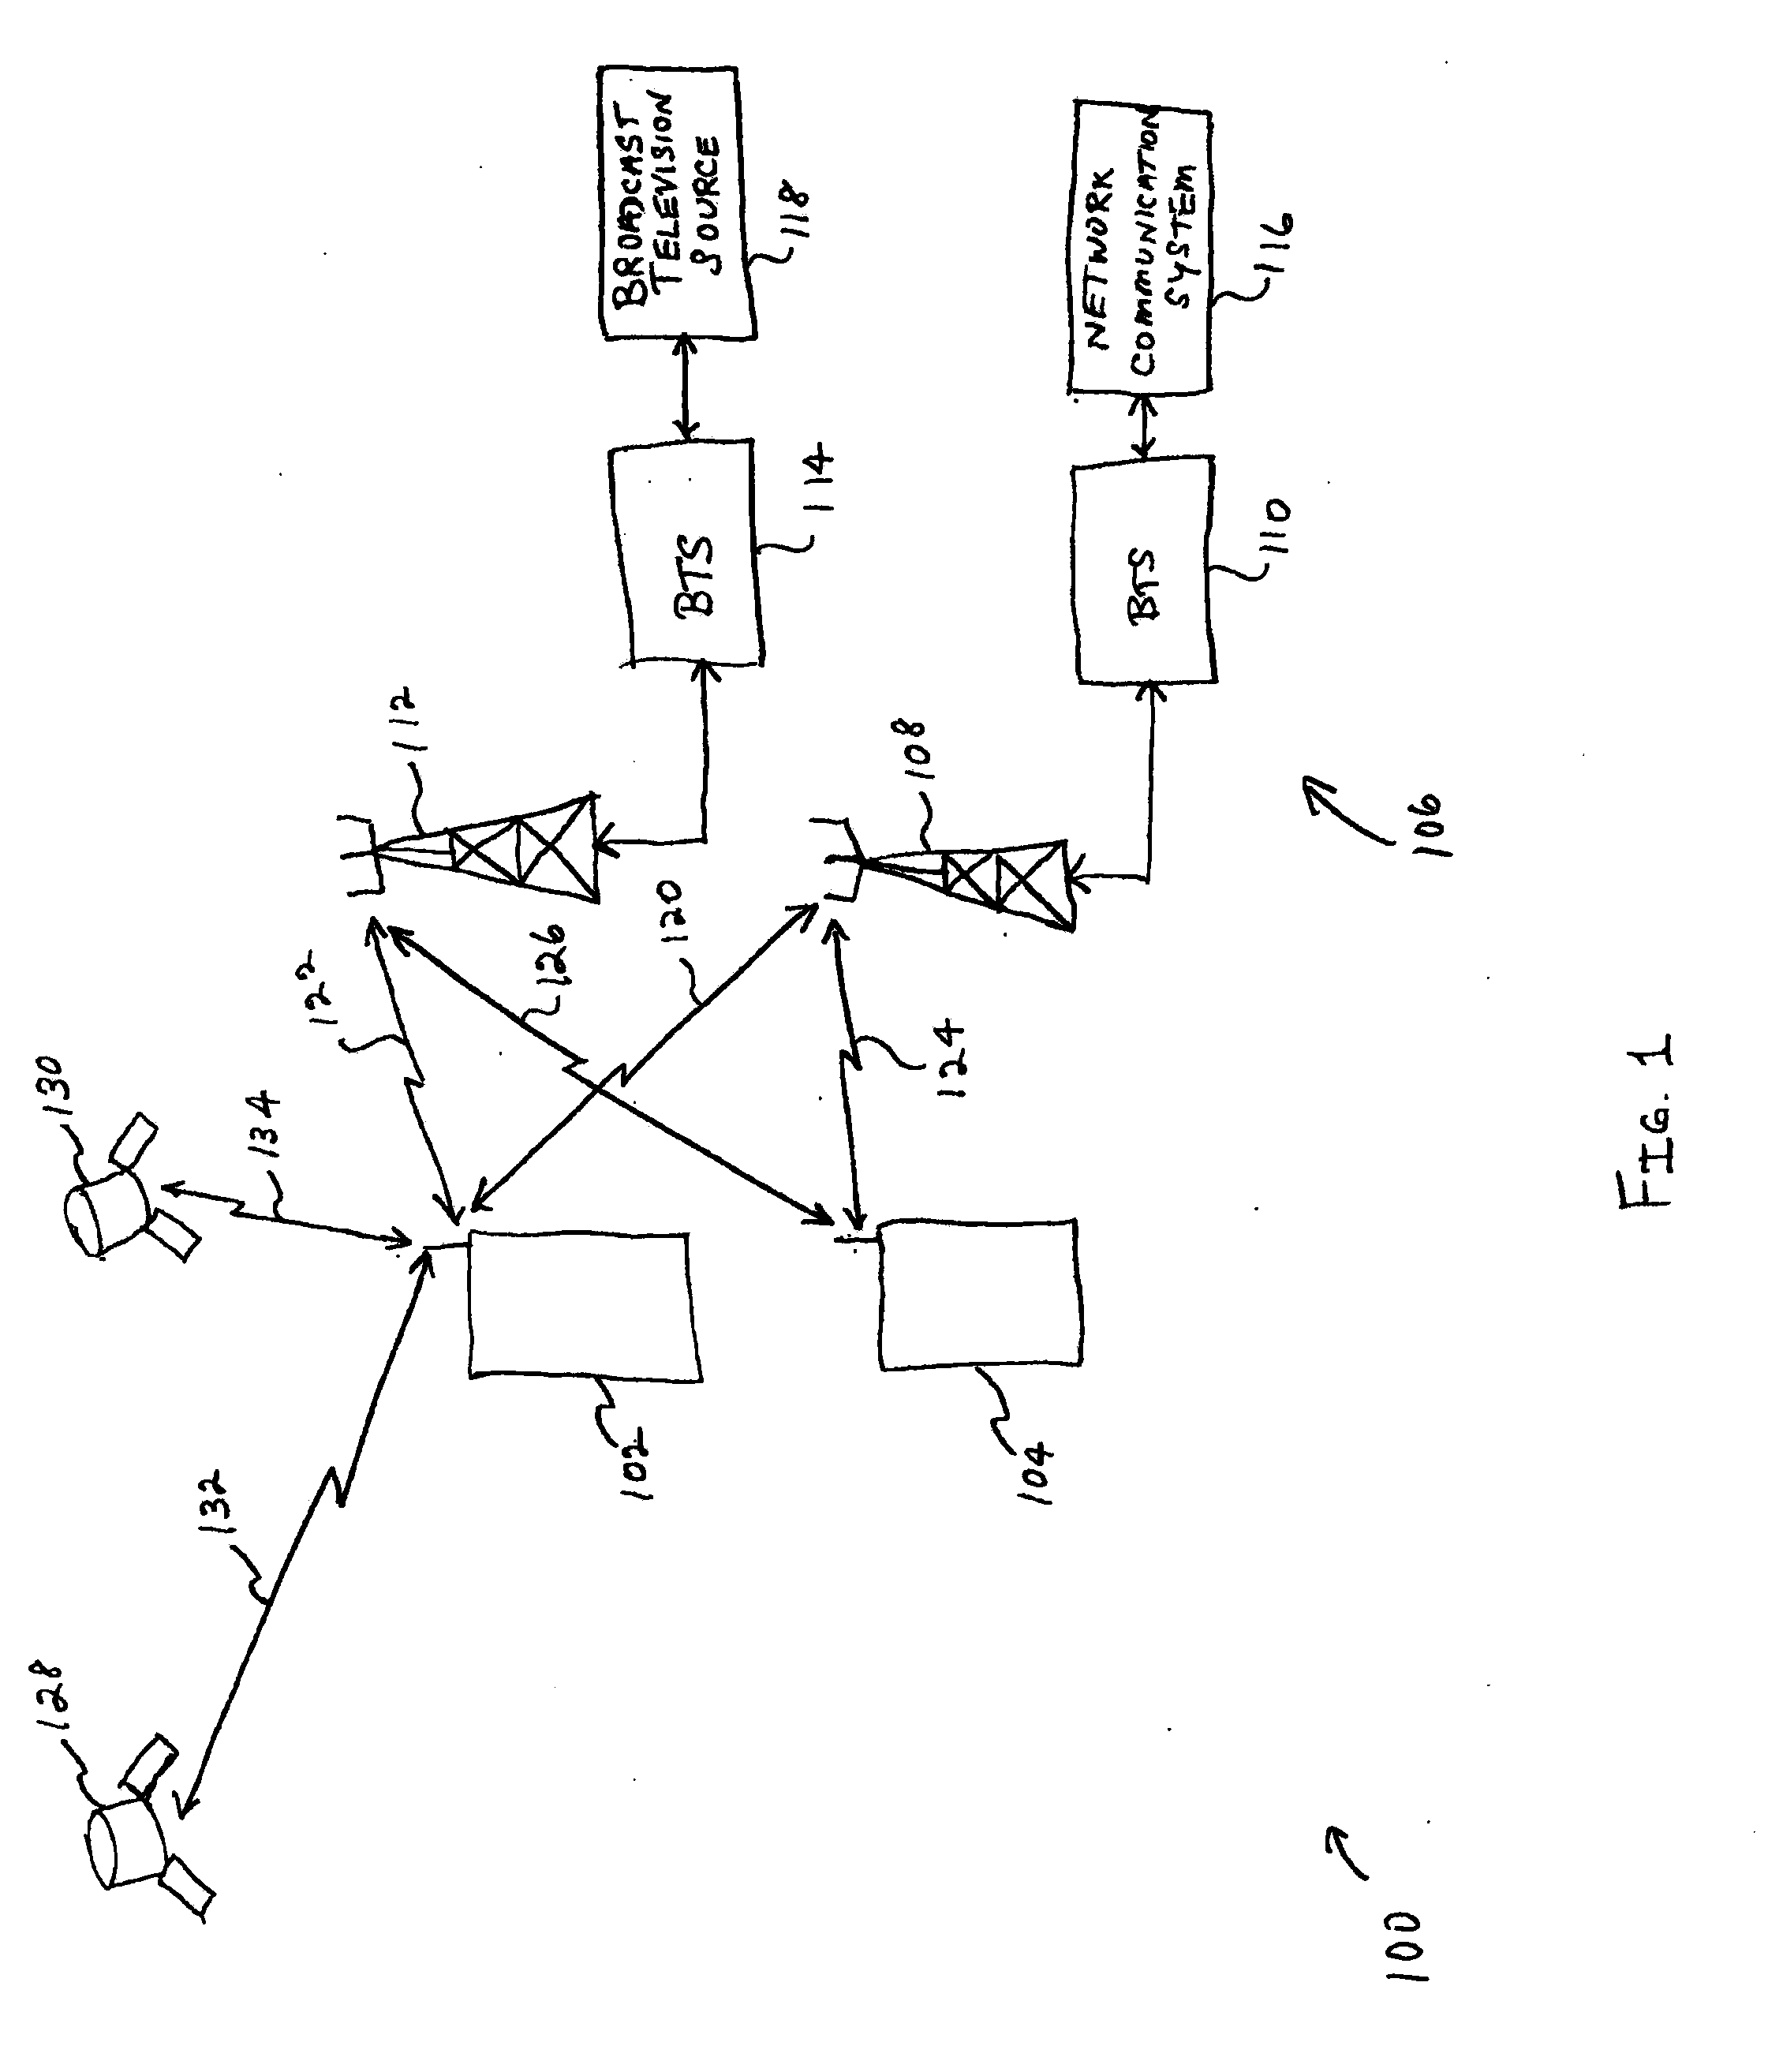 System and method for operational parameter selection to avoid interference in a wireless communication system